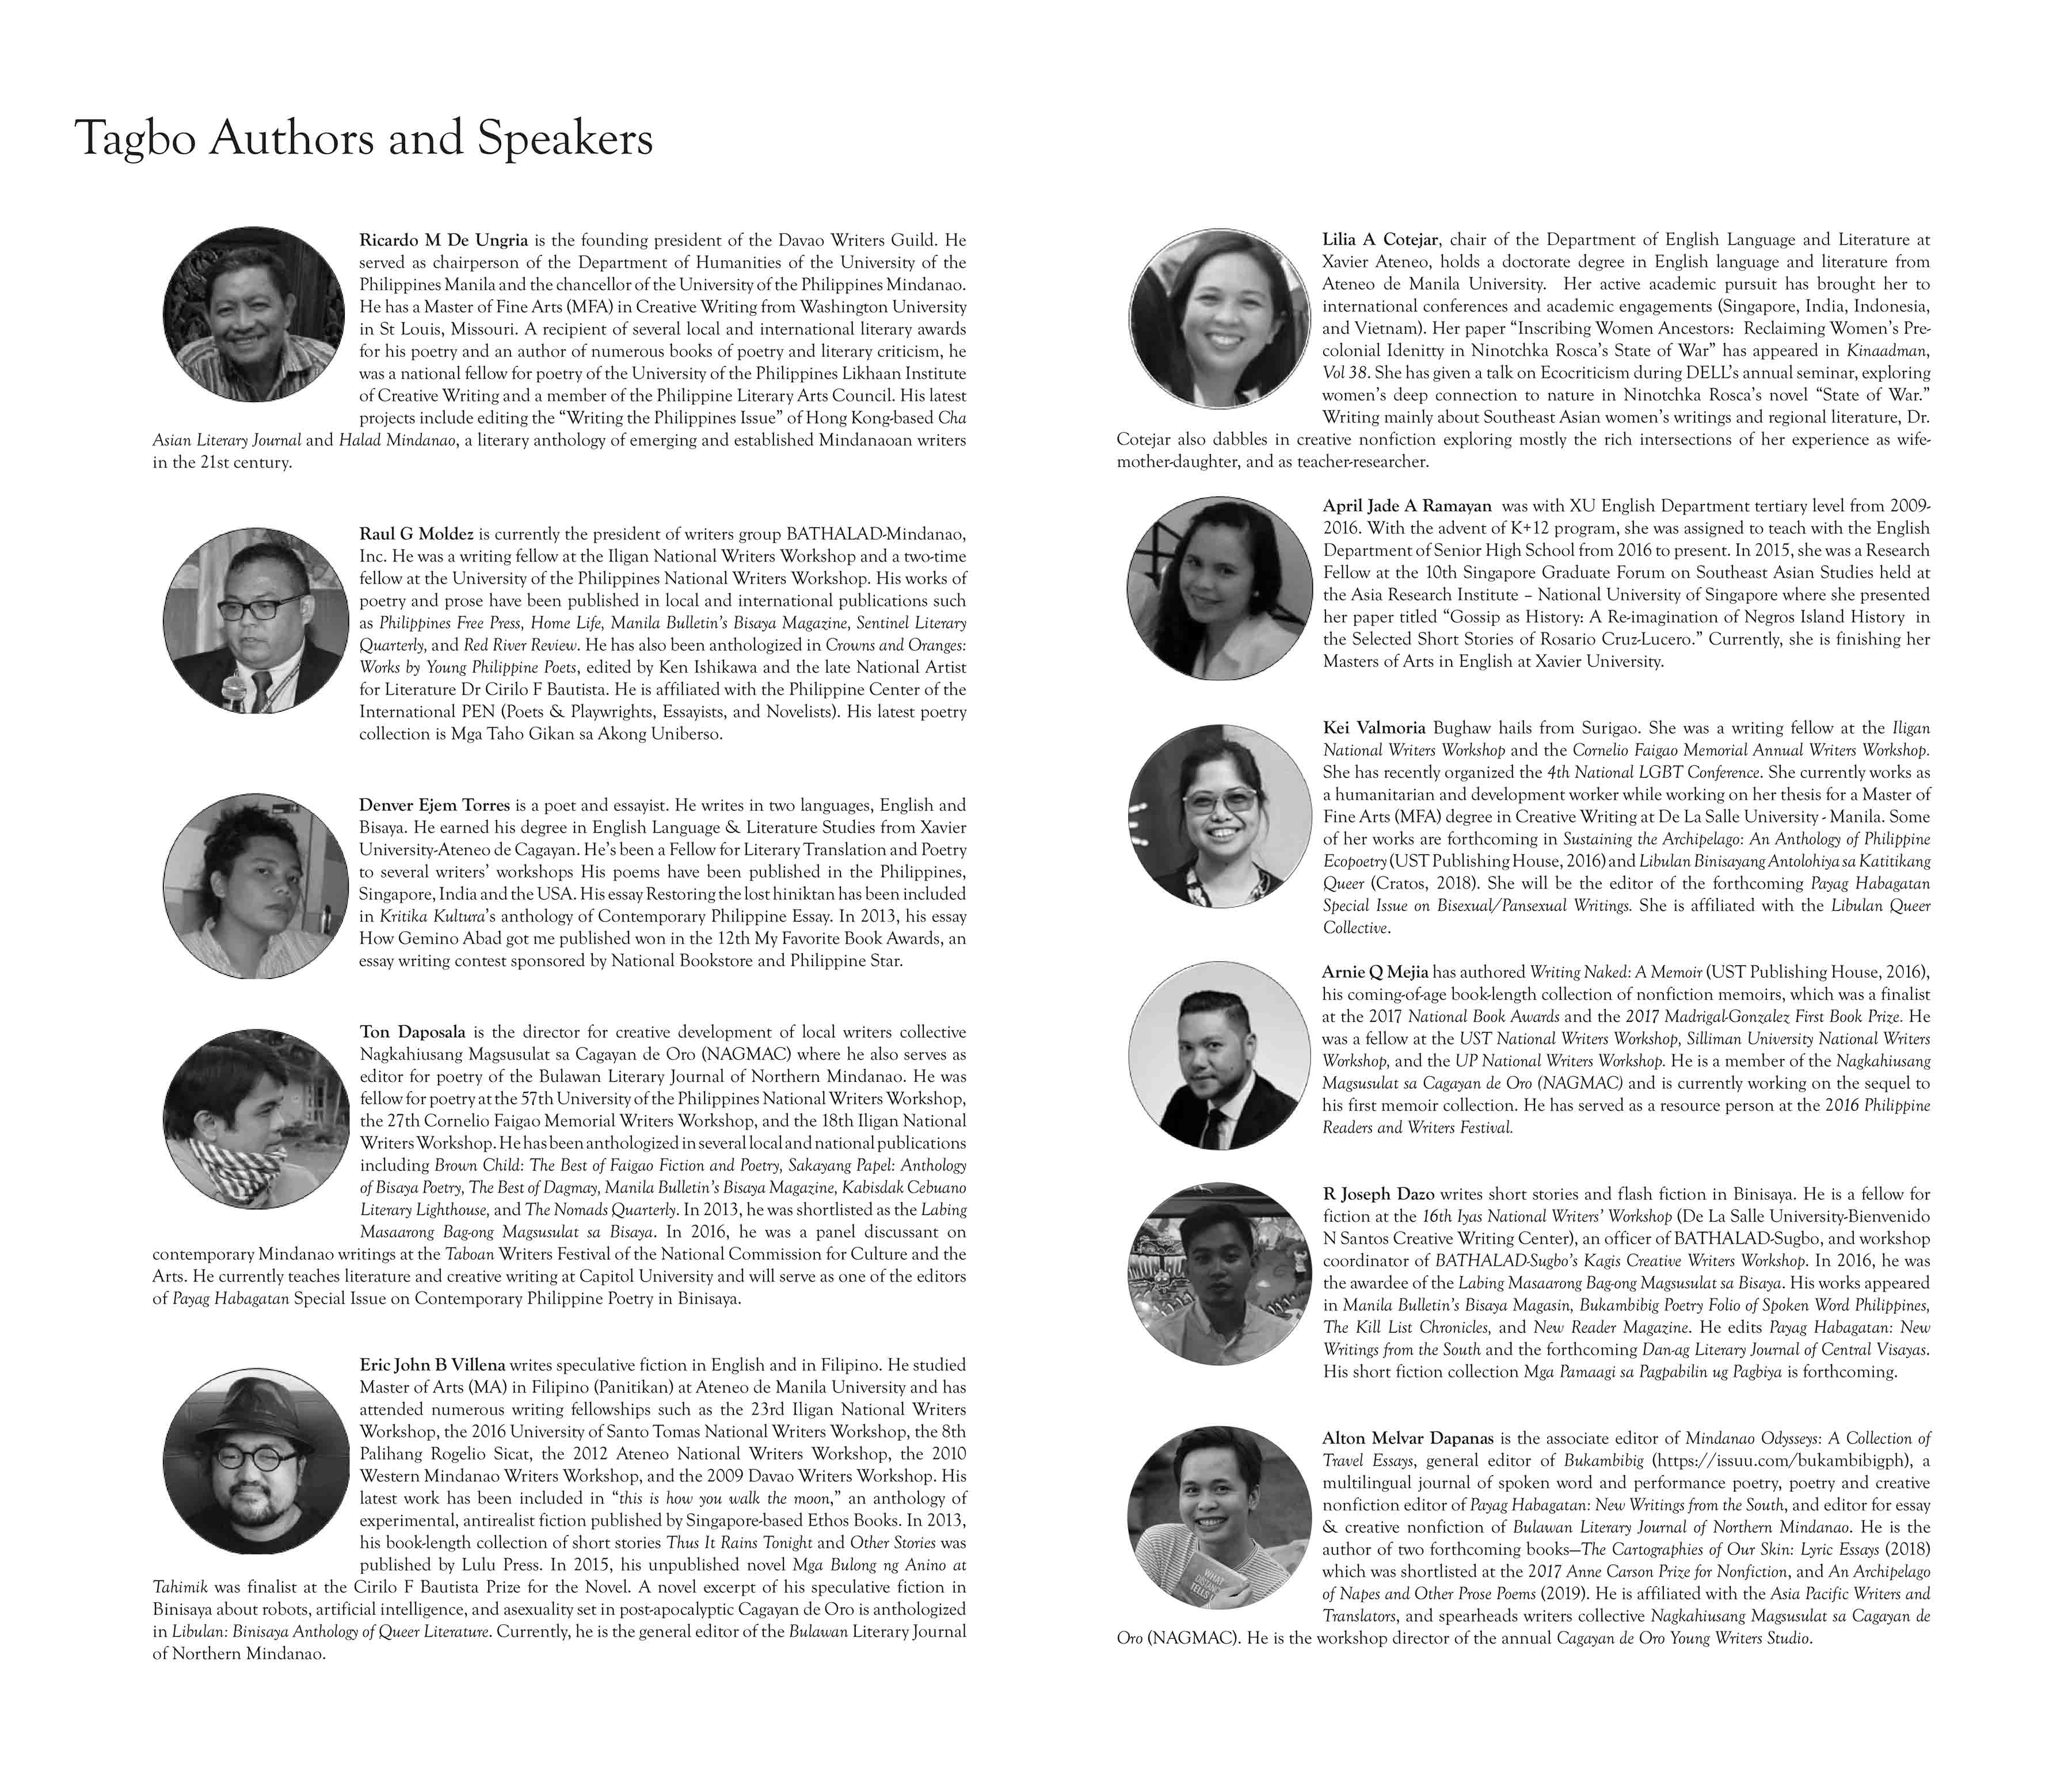 Tagbo Authors and Speakers 2